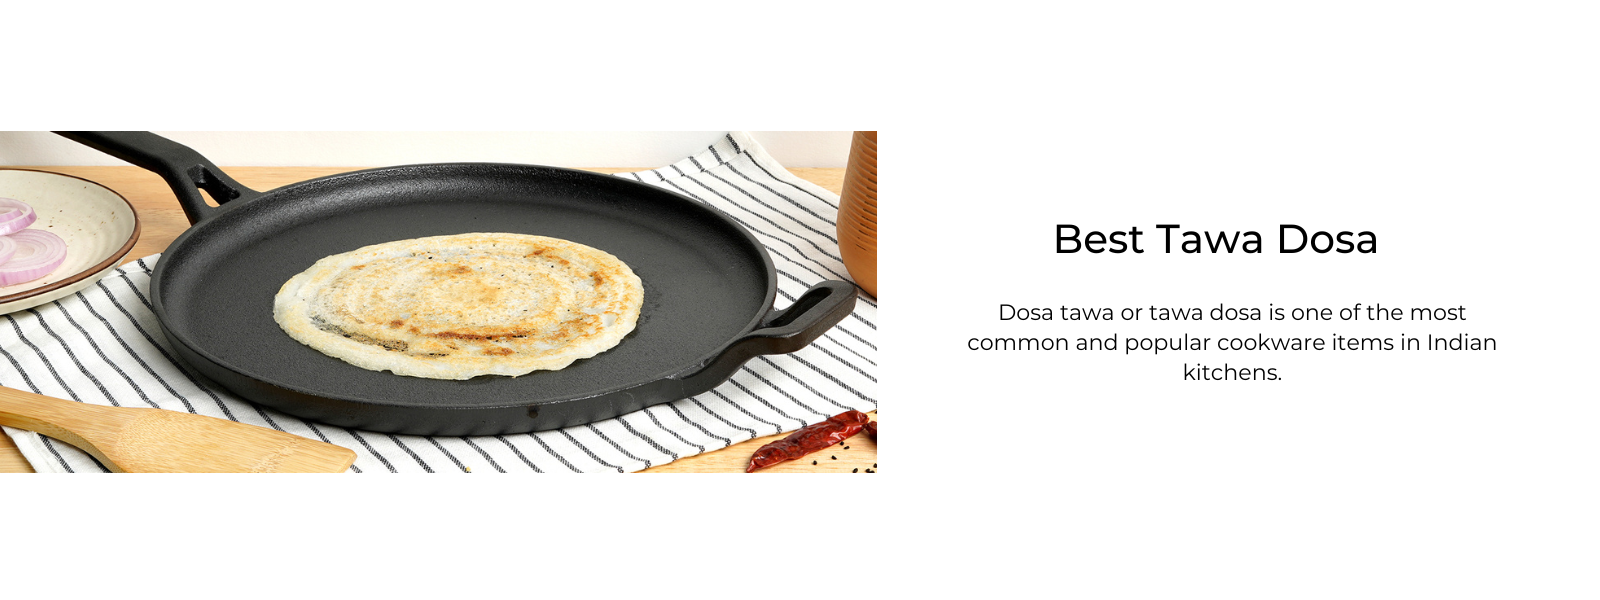 Best Tawa Dosa For Evenly Cooked Dosa